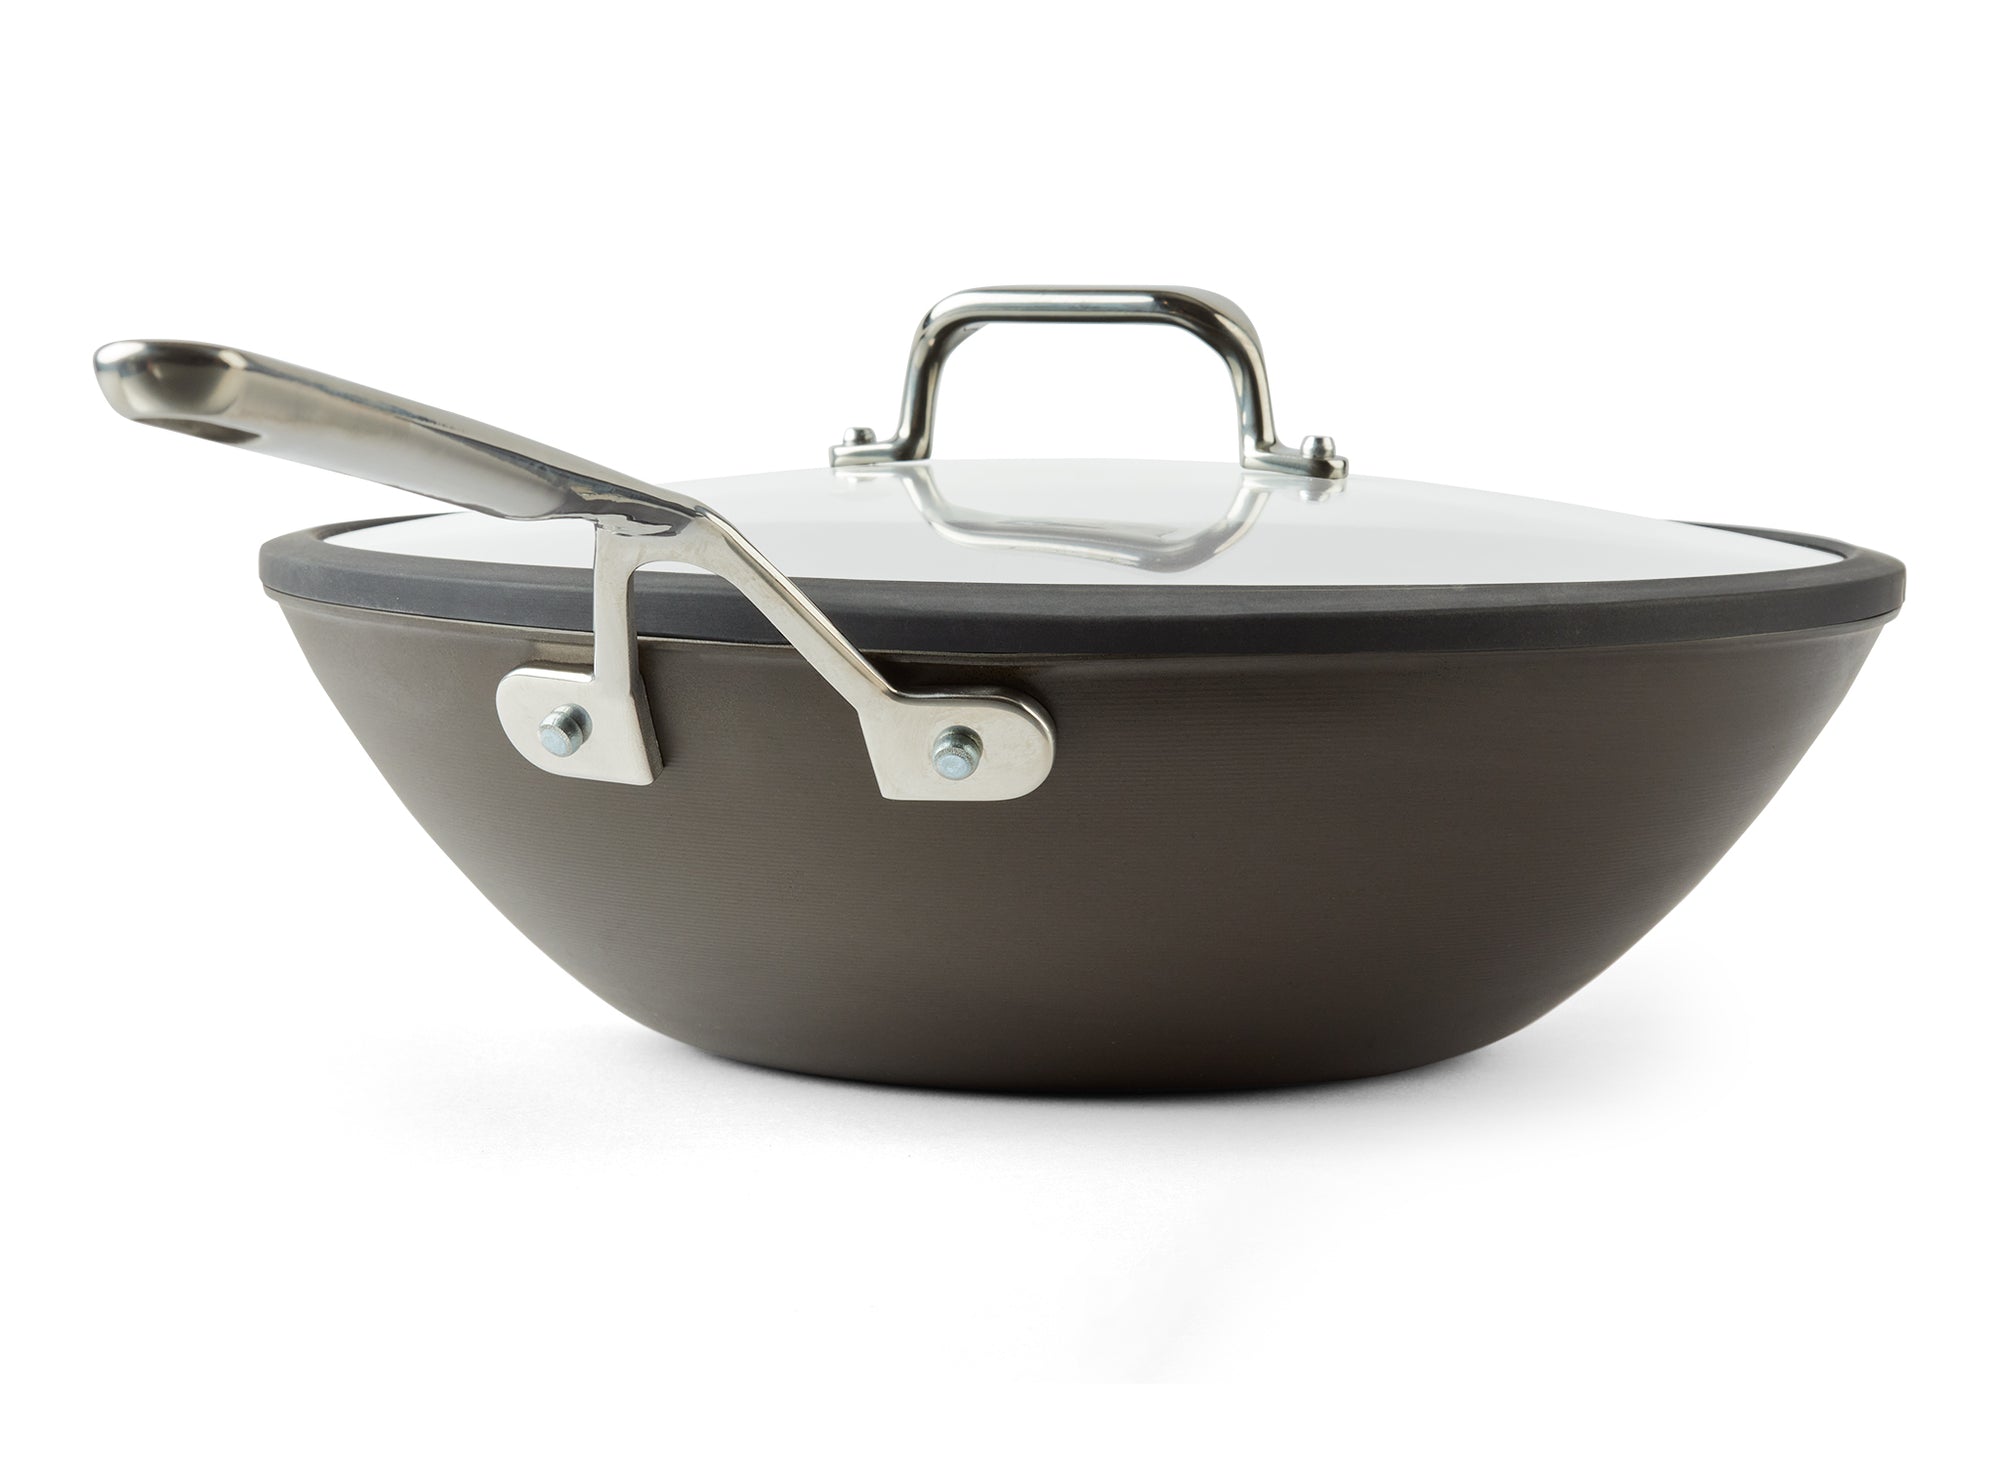 {{12-inch}} A backend view of the Misen Carbon Steel Wok on a white background. The handle faces toward you, and the wok’s lid sits atop it.